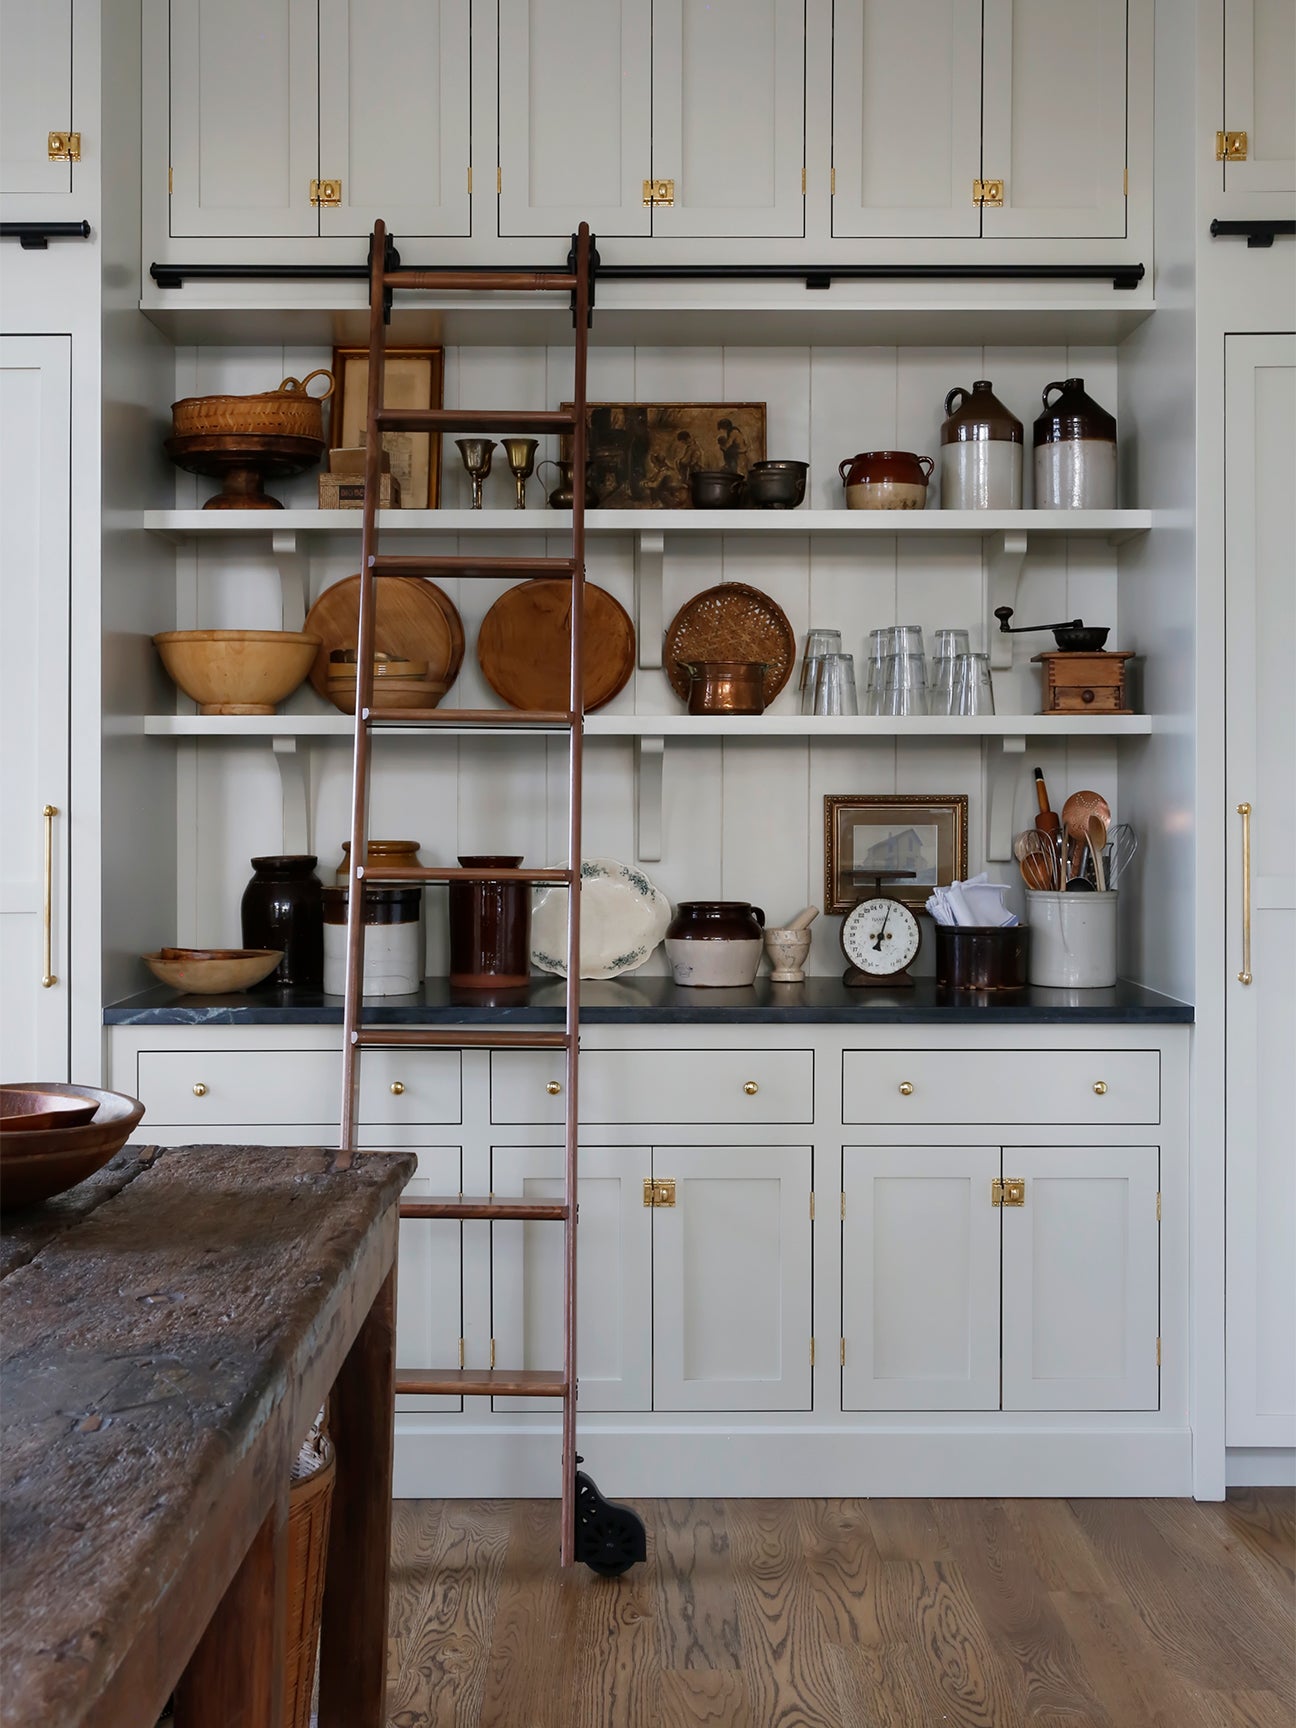 20 Farmhouse Kitchen Cabinets That Are Here to Charm   domino